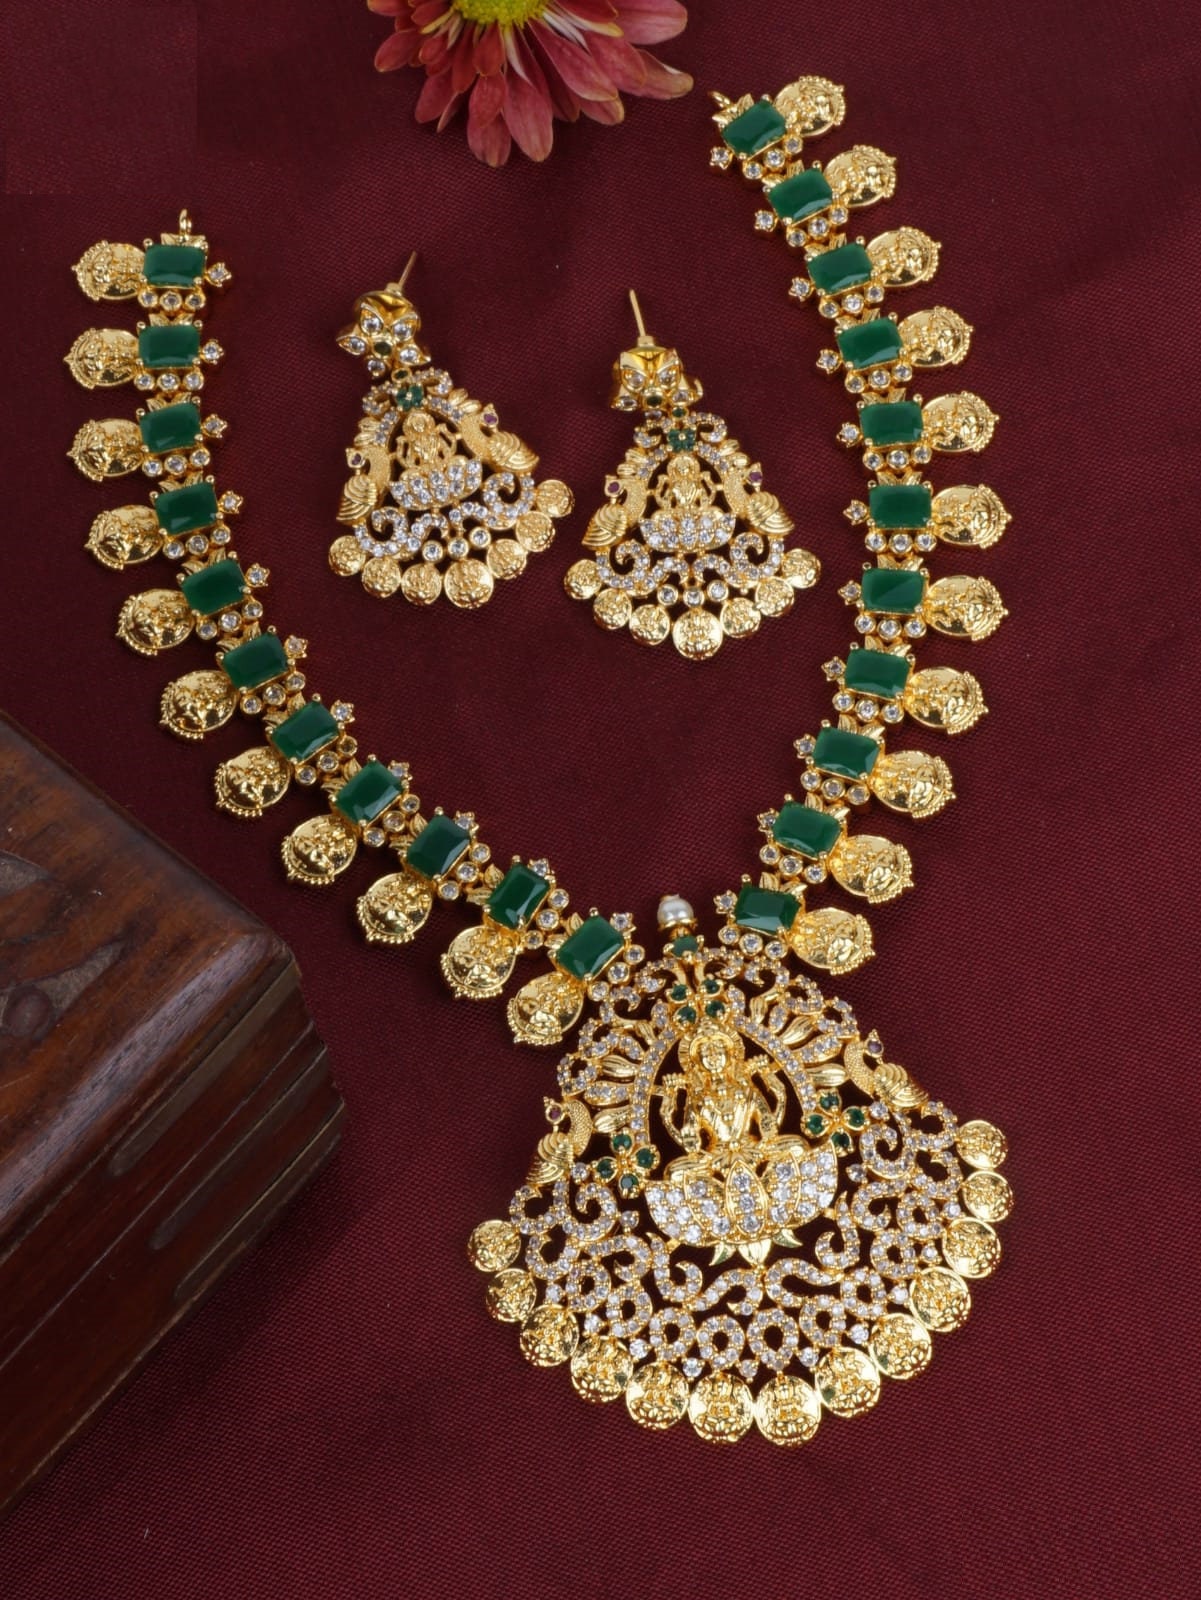 Gold Necklace with Beads | Bridal Gold Jewellery Design